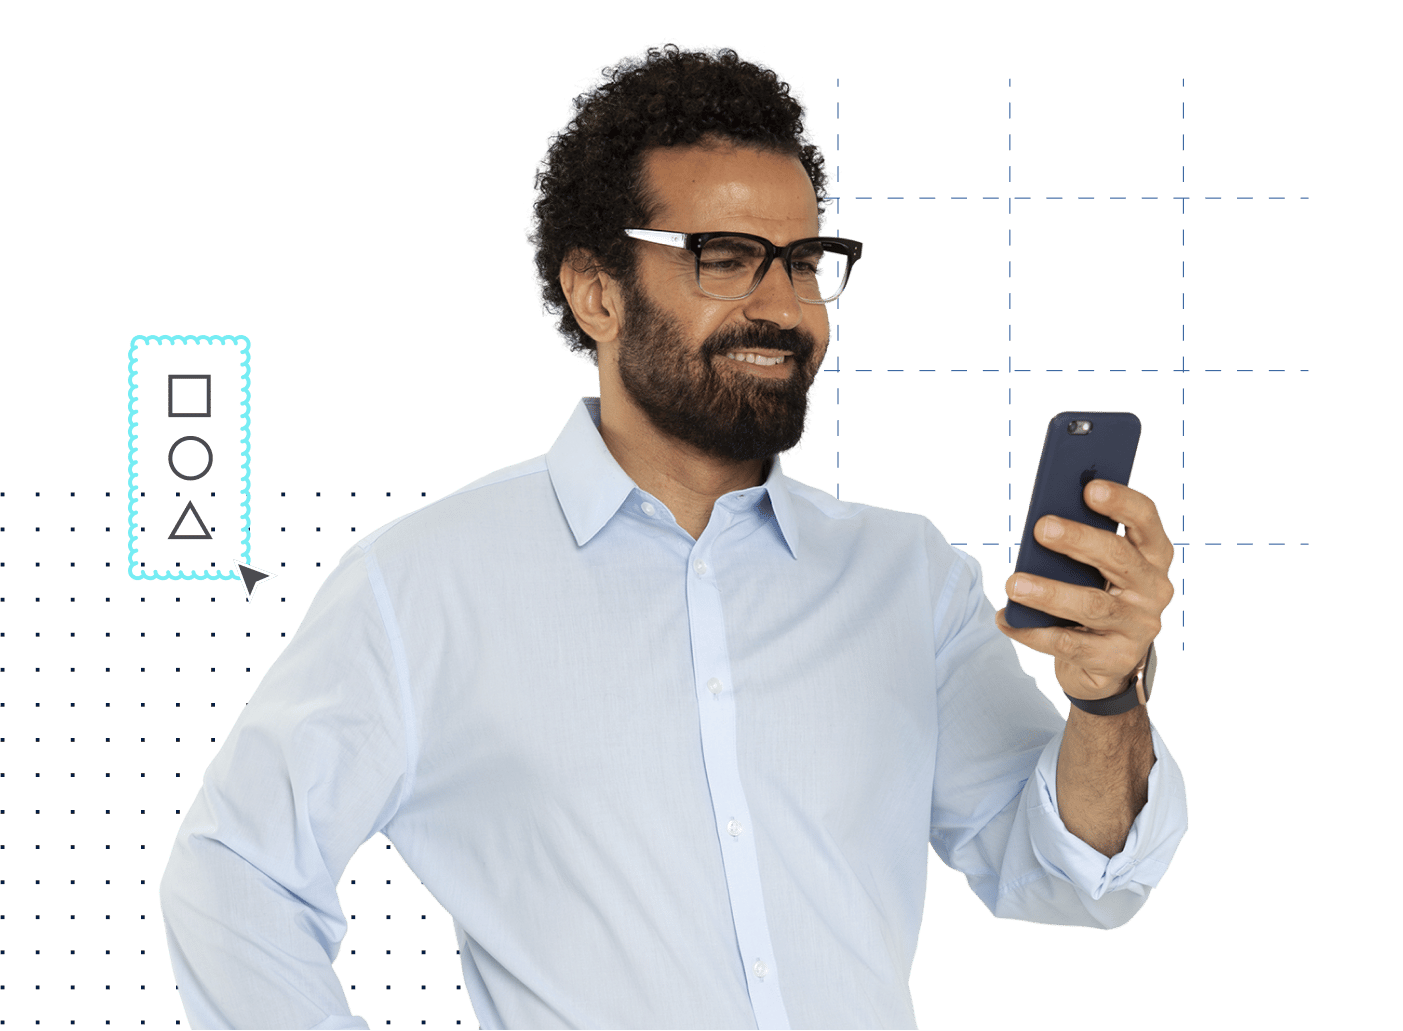 male architect in button-down shirt with glasses looking at mobile device